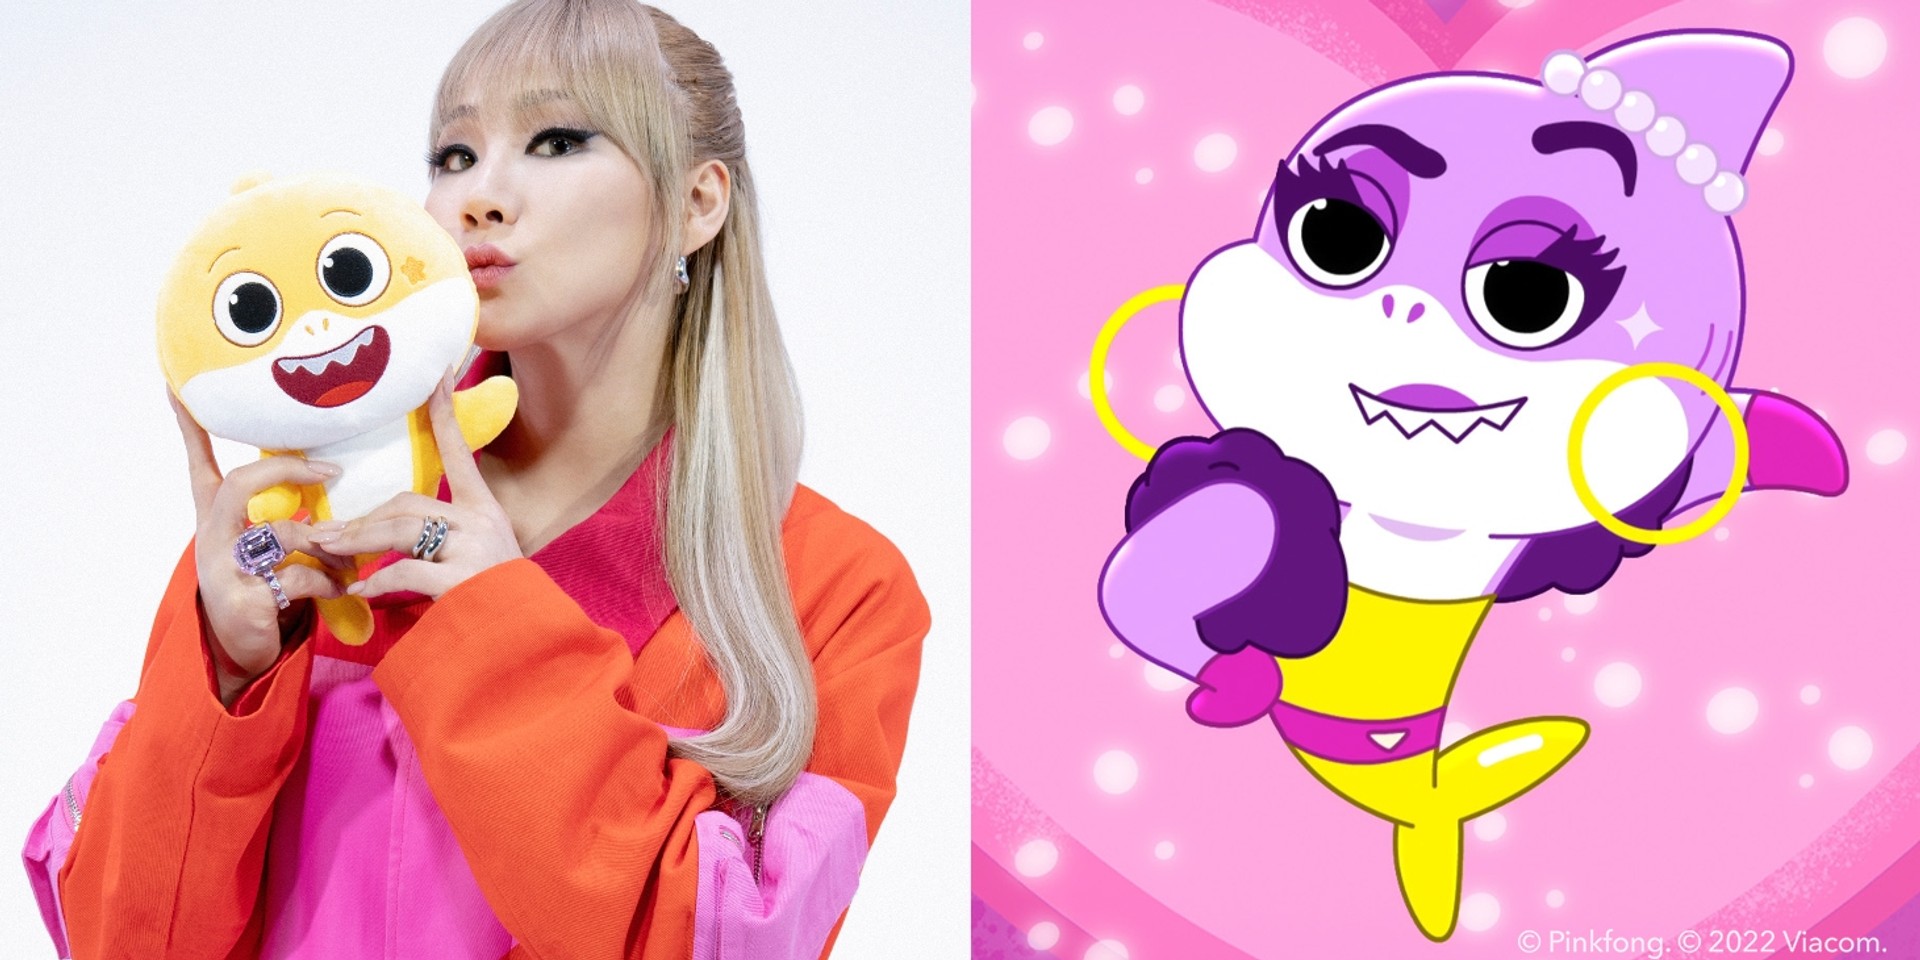 CL to interpret the animated character in 